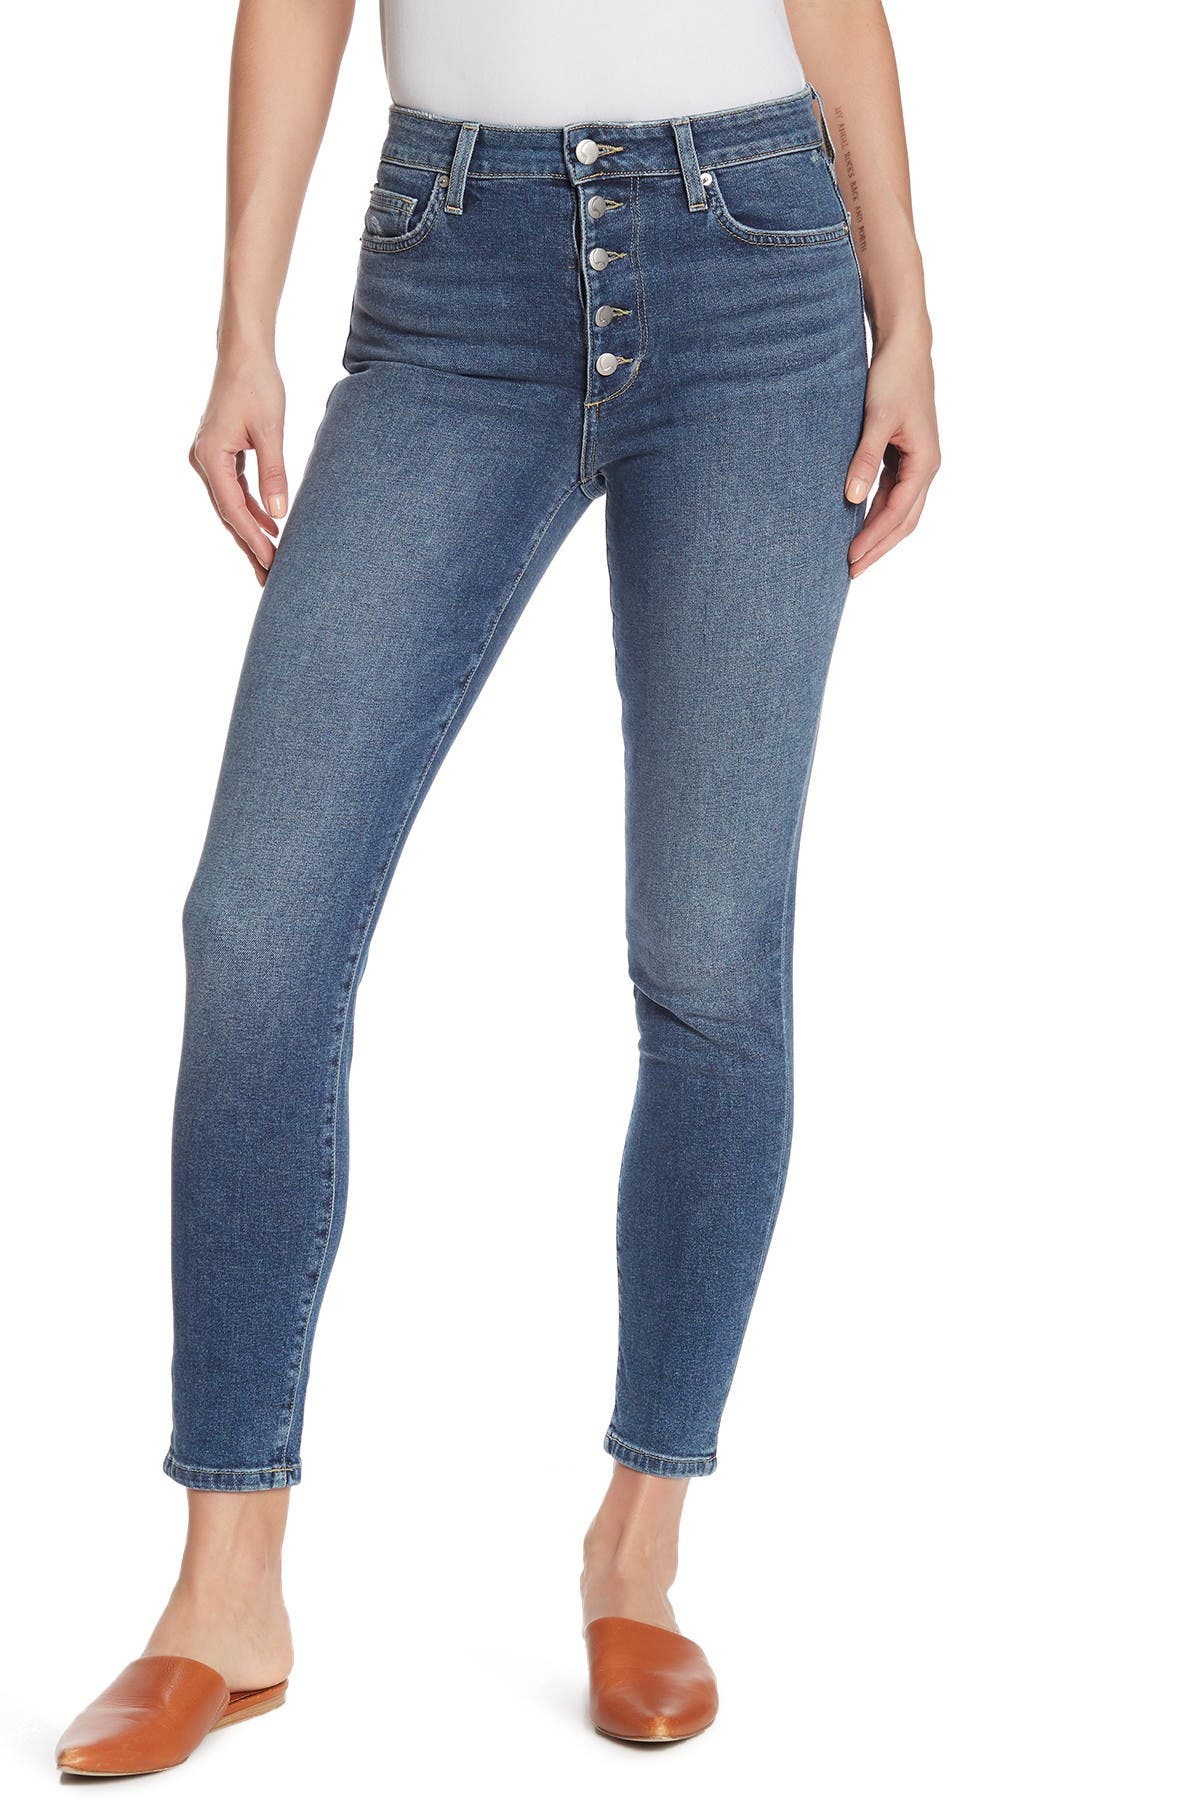 Joes Jeans Womens Charlie High Rise Skinny Ankle